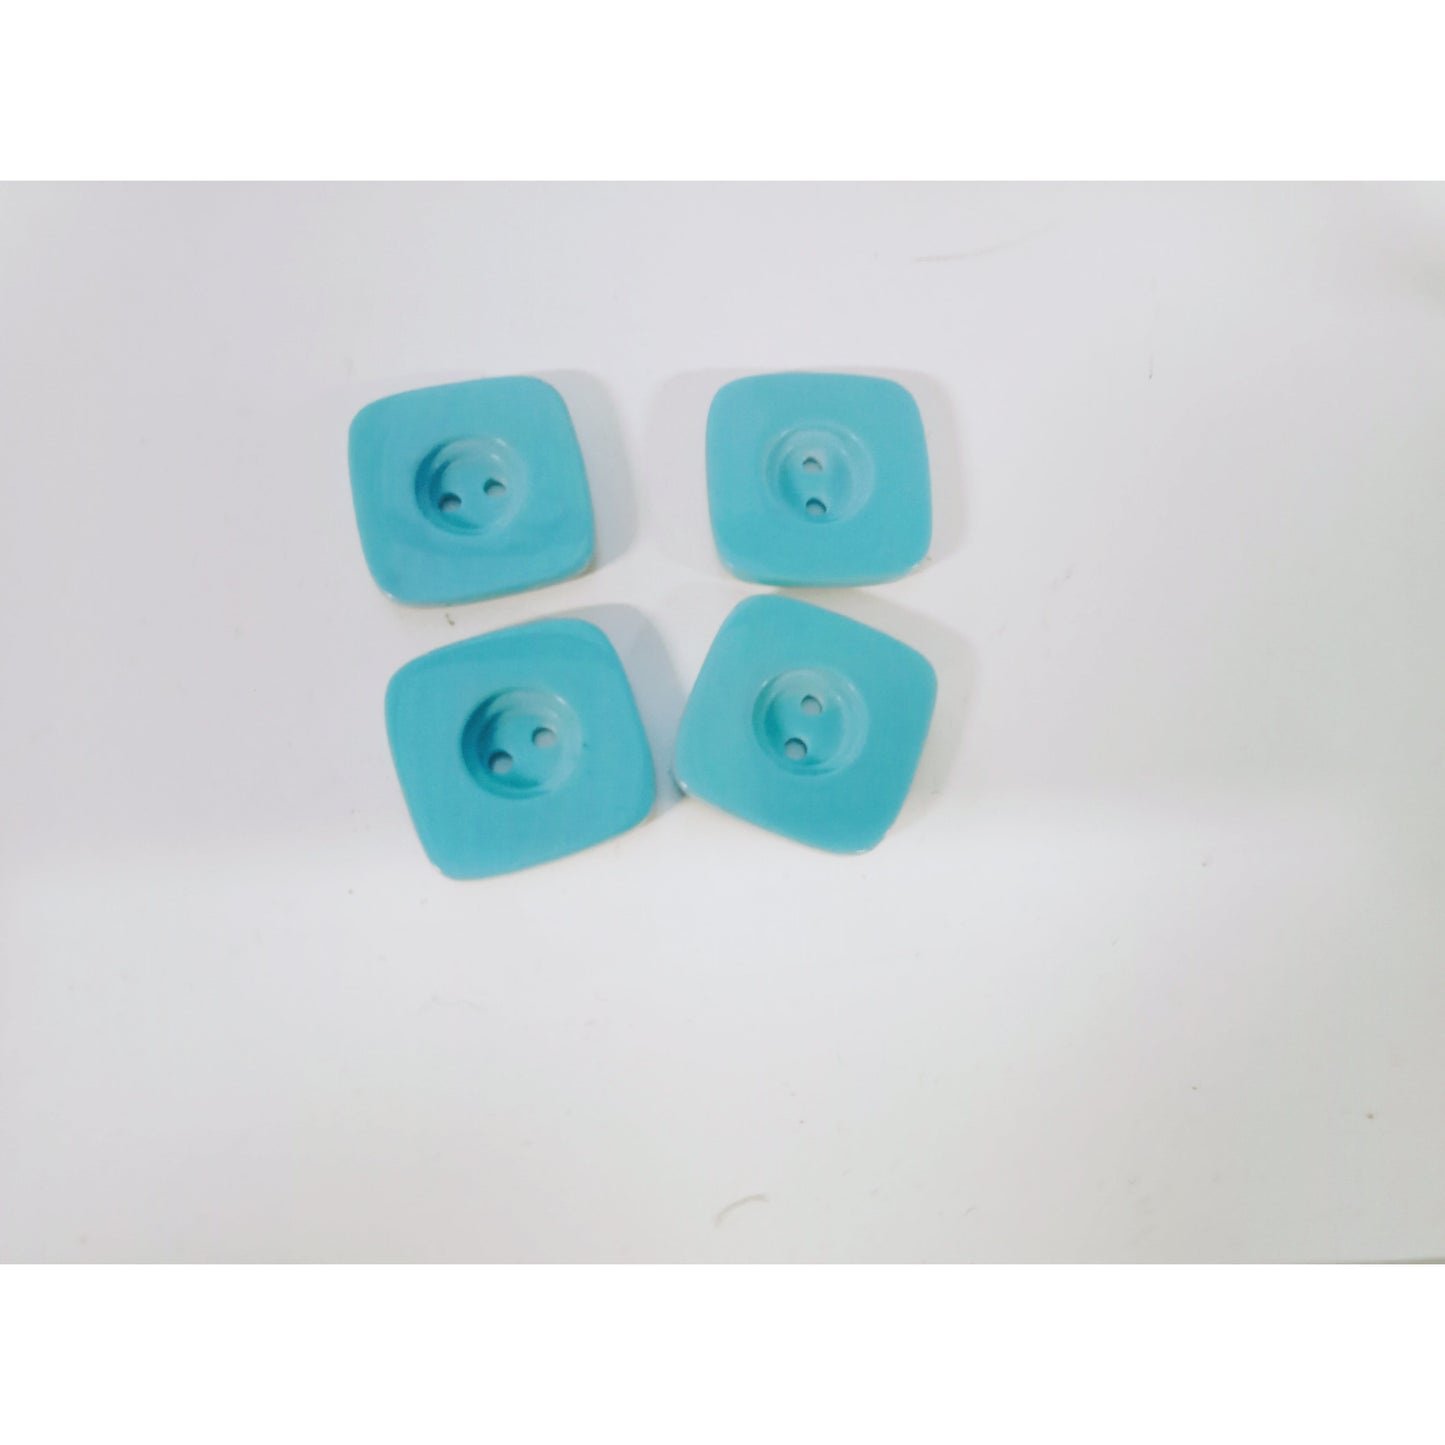 Baby blue square buttons